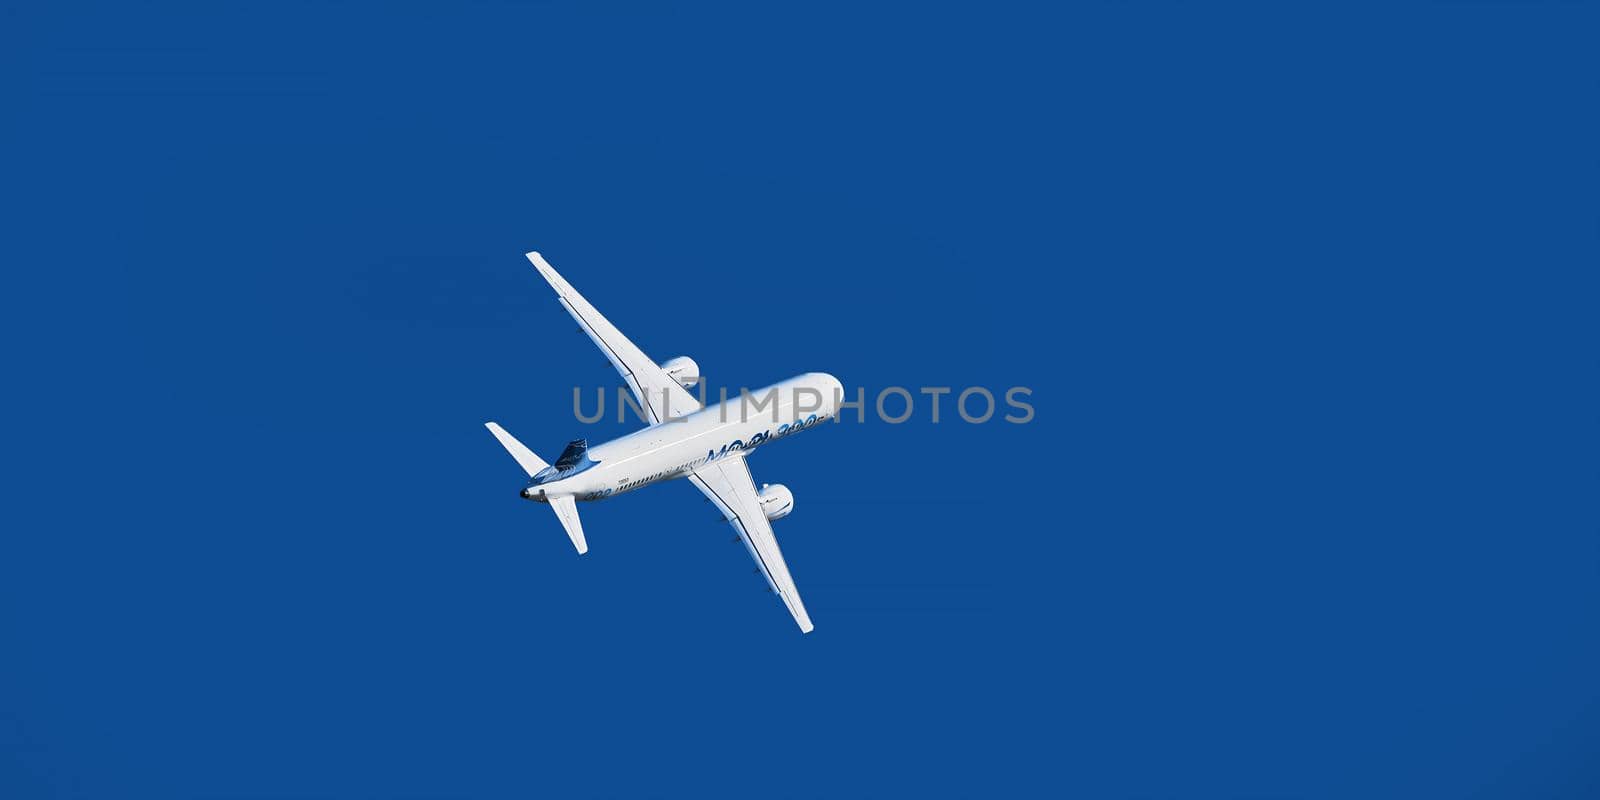 New Russian passenger aircraft MS-21-300 flying prototype of a new Russian civil airliner during test flights on MAKS 2019 airshow. ZHUKOVSKY, RUSSIA, AUGUST 29, 2019 by EvgeniyQW